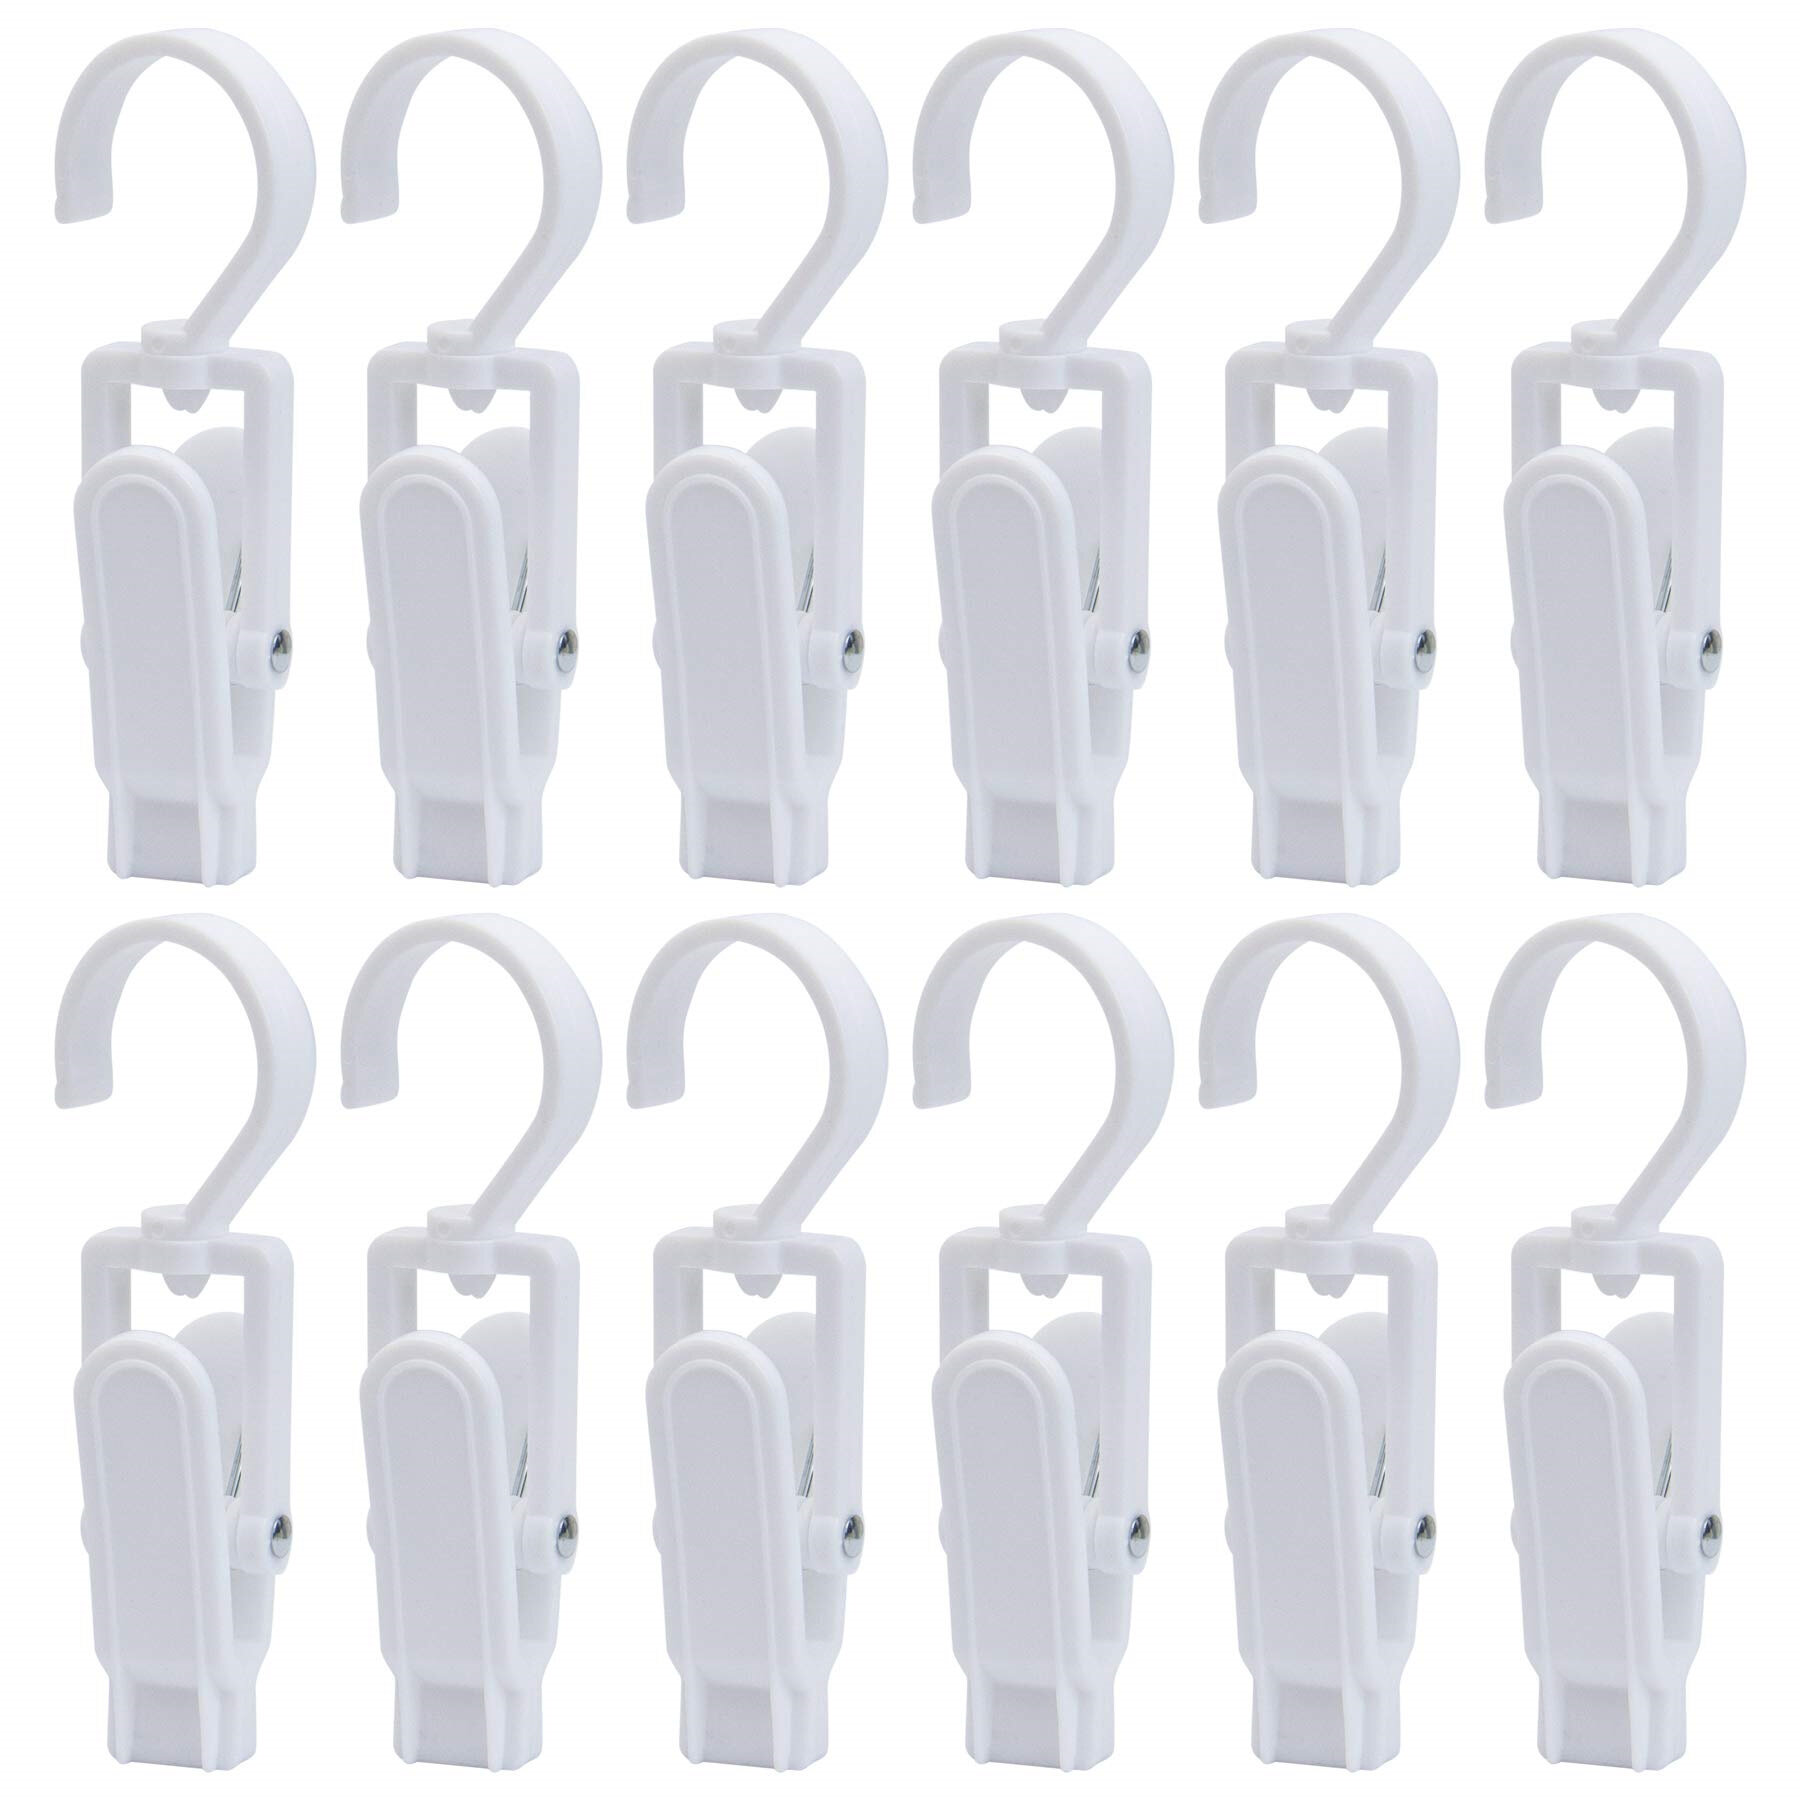 Aipaide 20PCS Laundry Hooks Clip Portable Anti-Slip Plastic Hangers Clips with 360 Degree Swivel Hook for Clothes Curtain Bath Towel Hat Sheets Coat